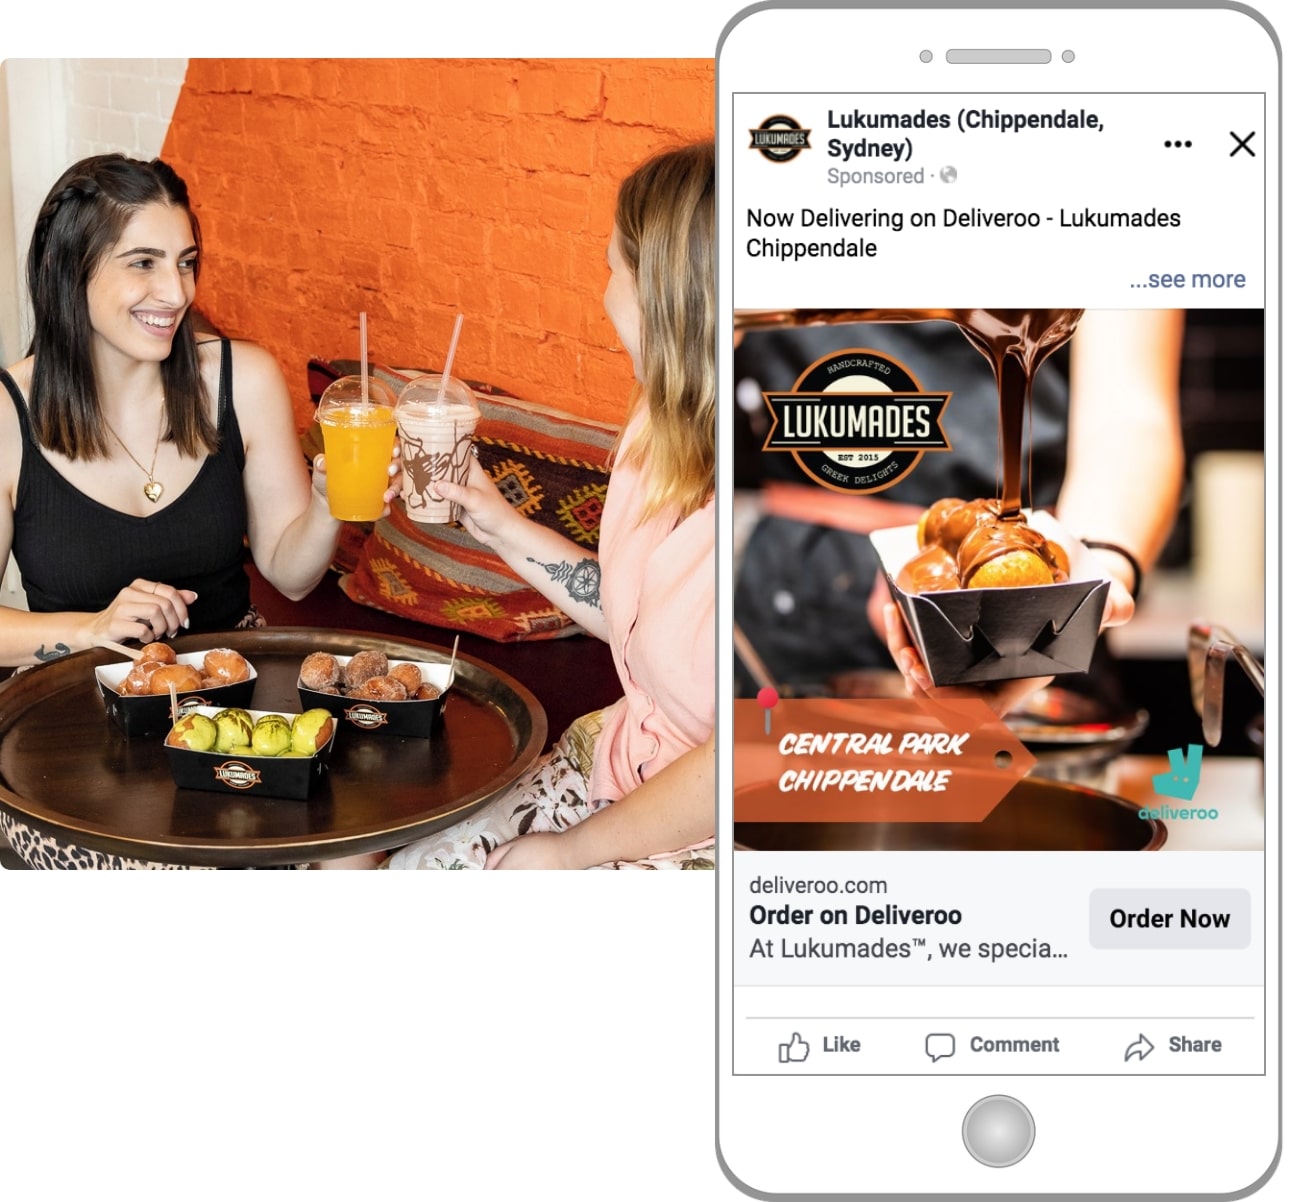 Influencer marketing campaign and location-based social ads